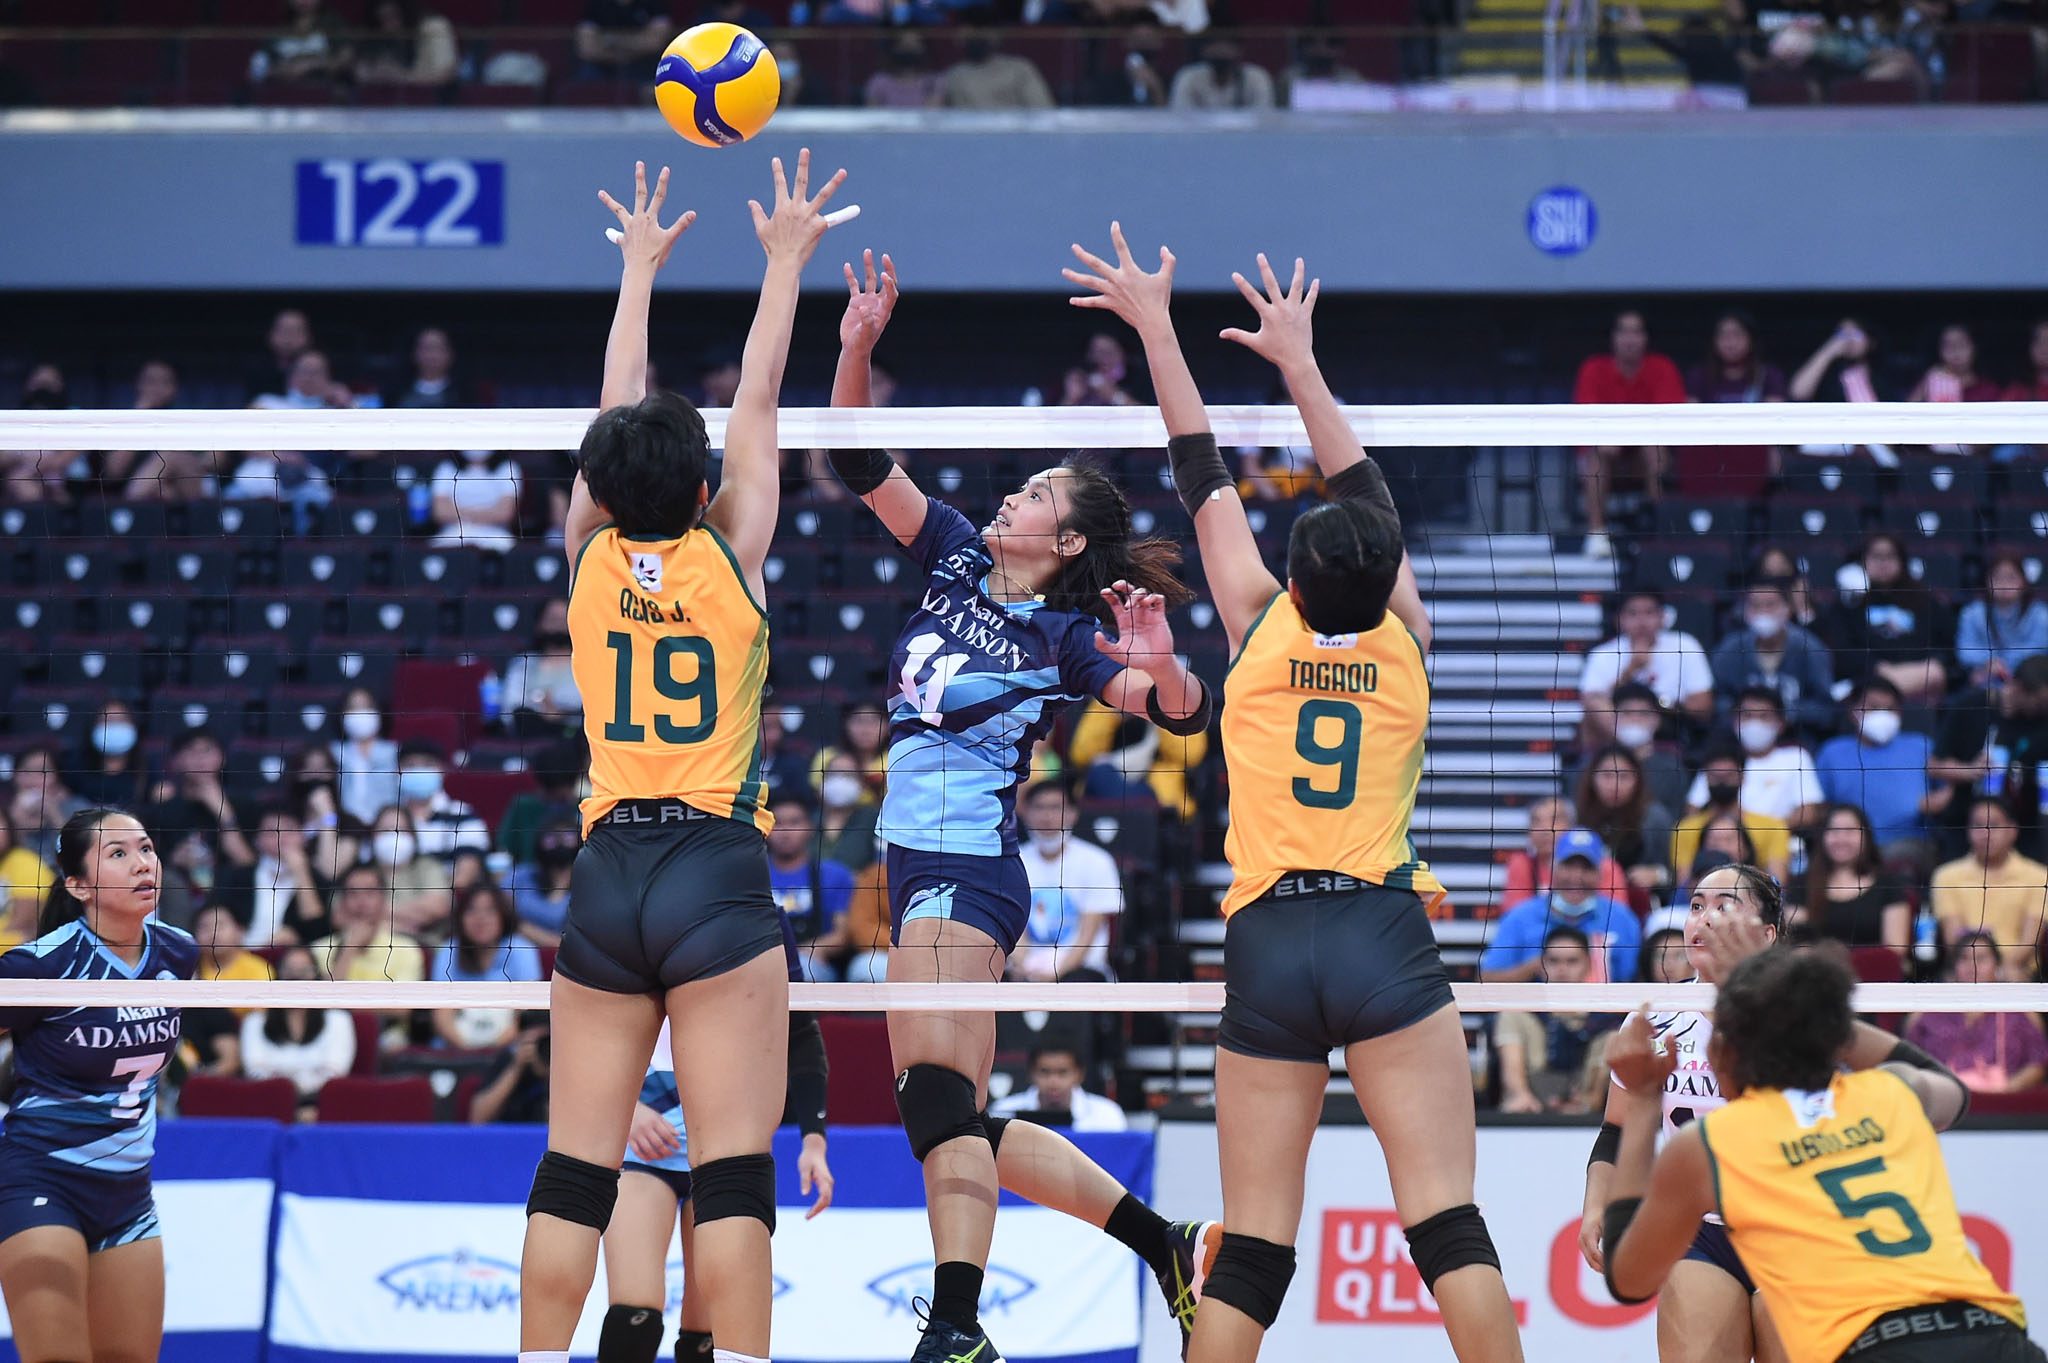 Adamson shakes off 2nd-set collapse, downs FEU 